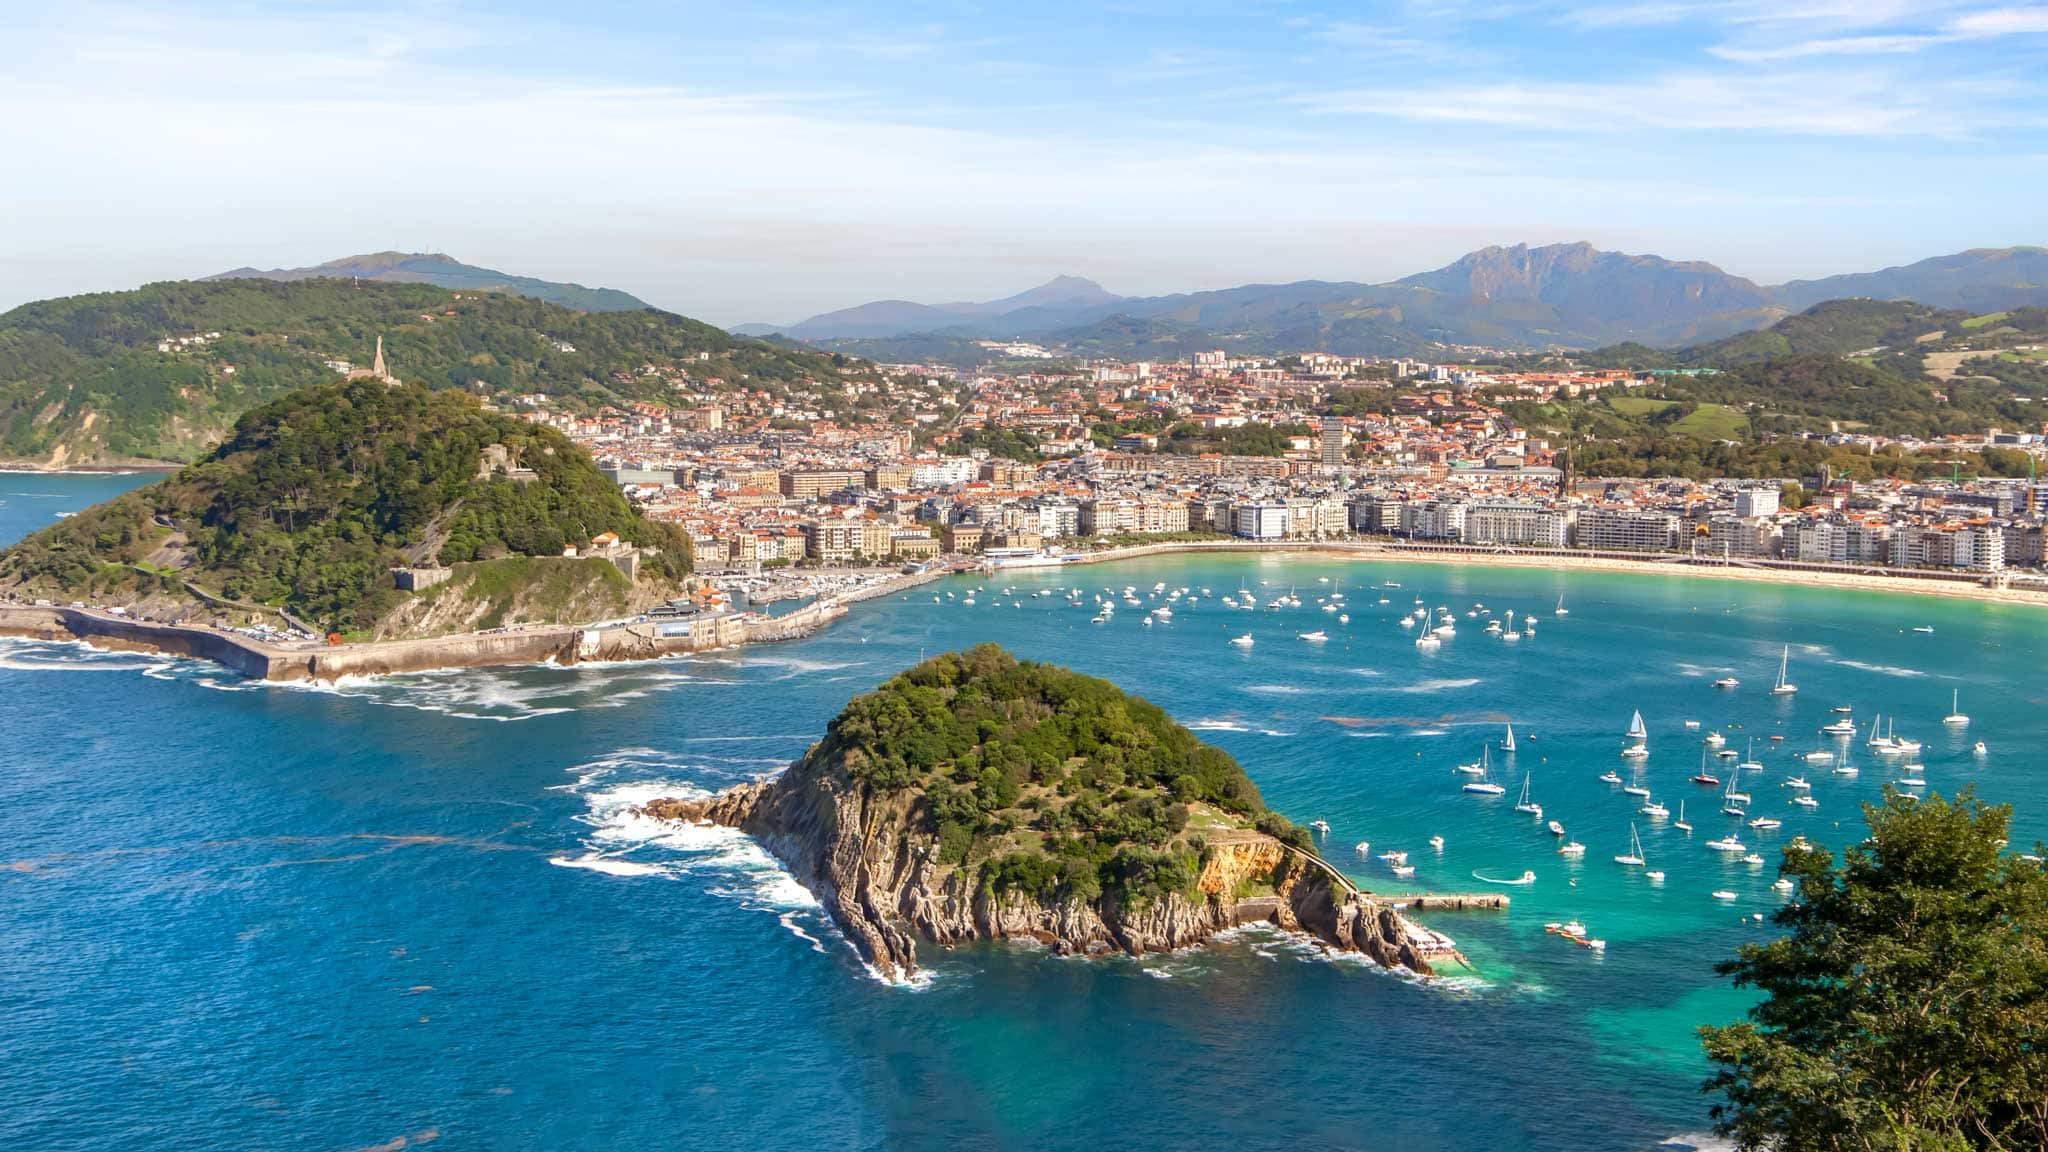 Views over the harbour in San Sebastian, one of the best places to visit in Spain